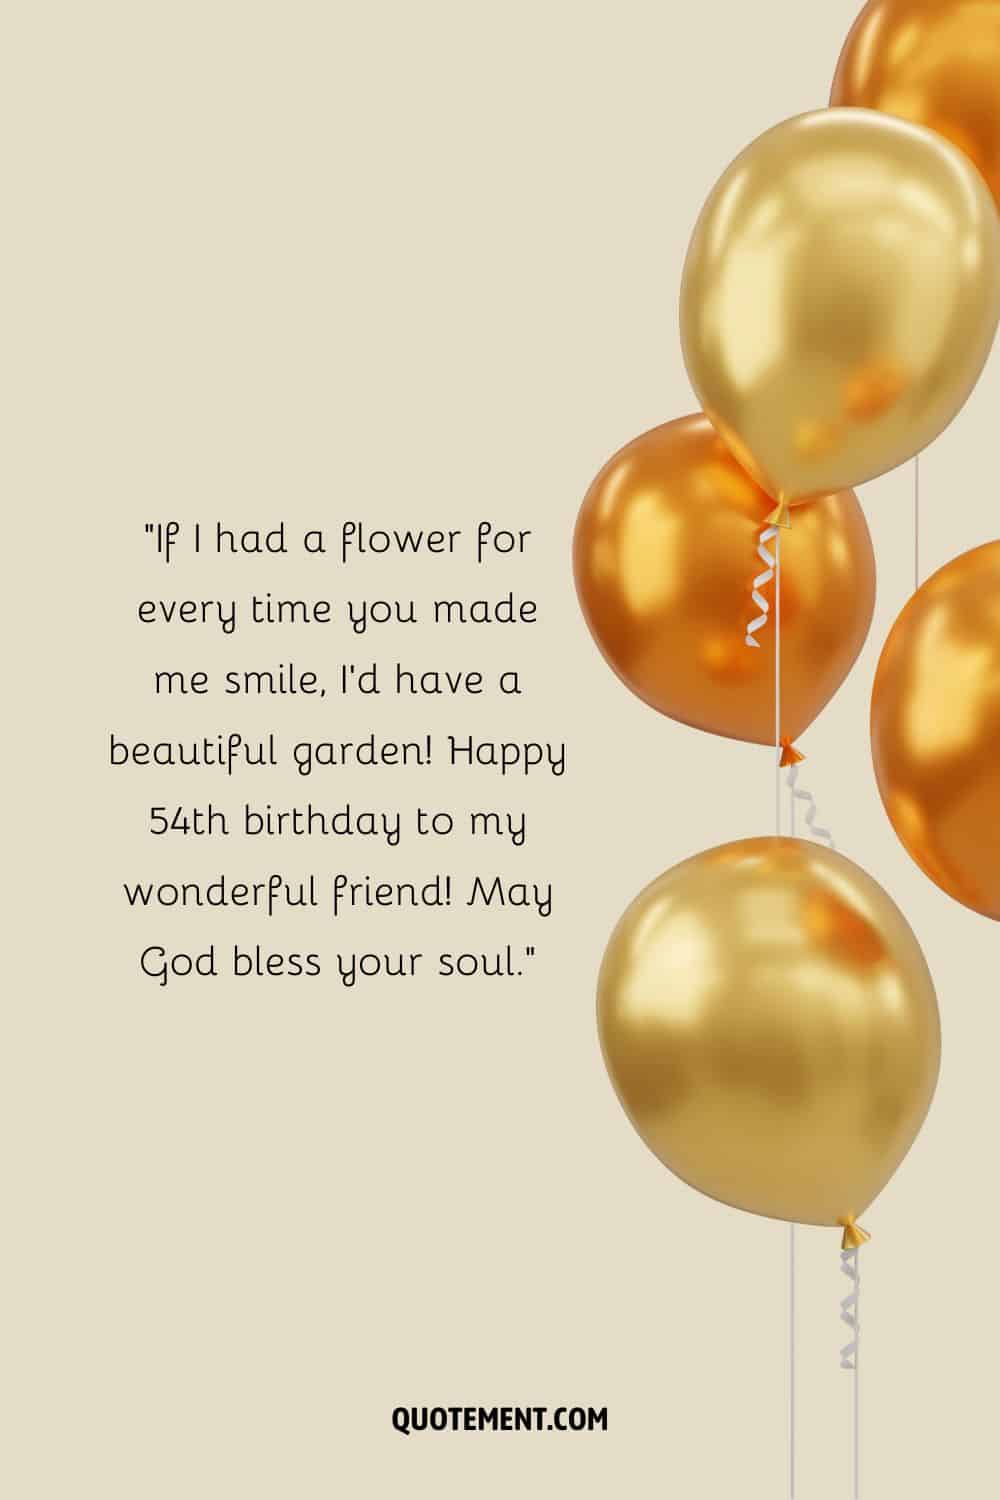 Heartfelt message for a friend's 54th birthday and five balloons next to it
